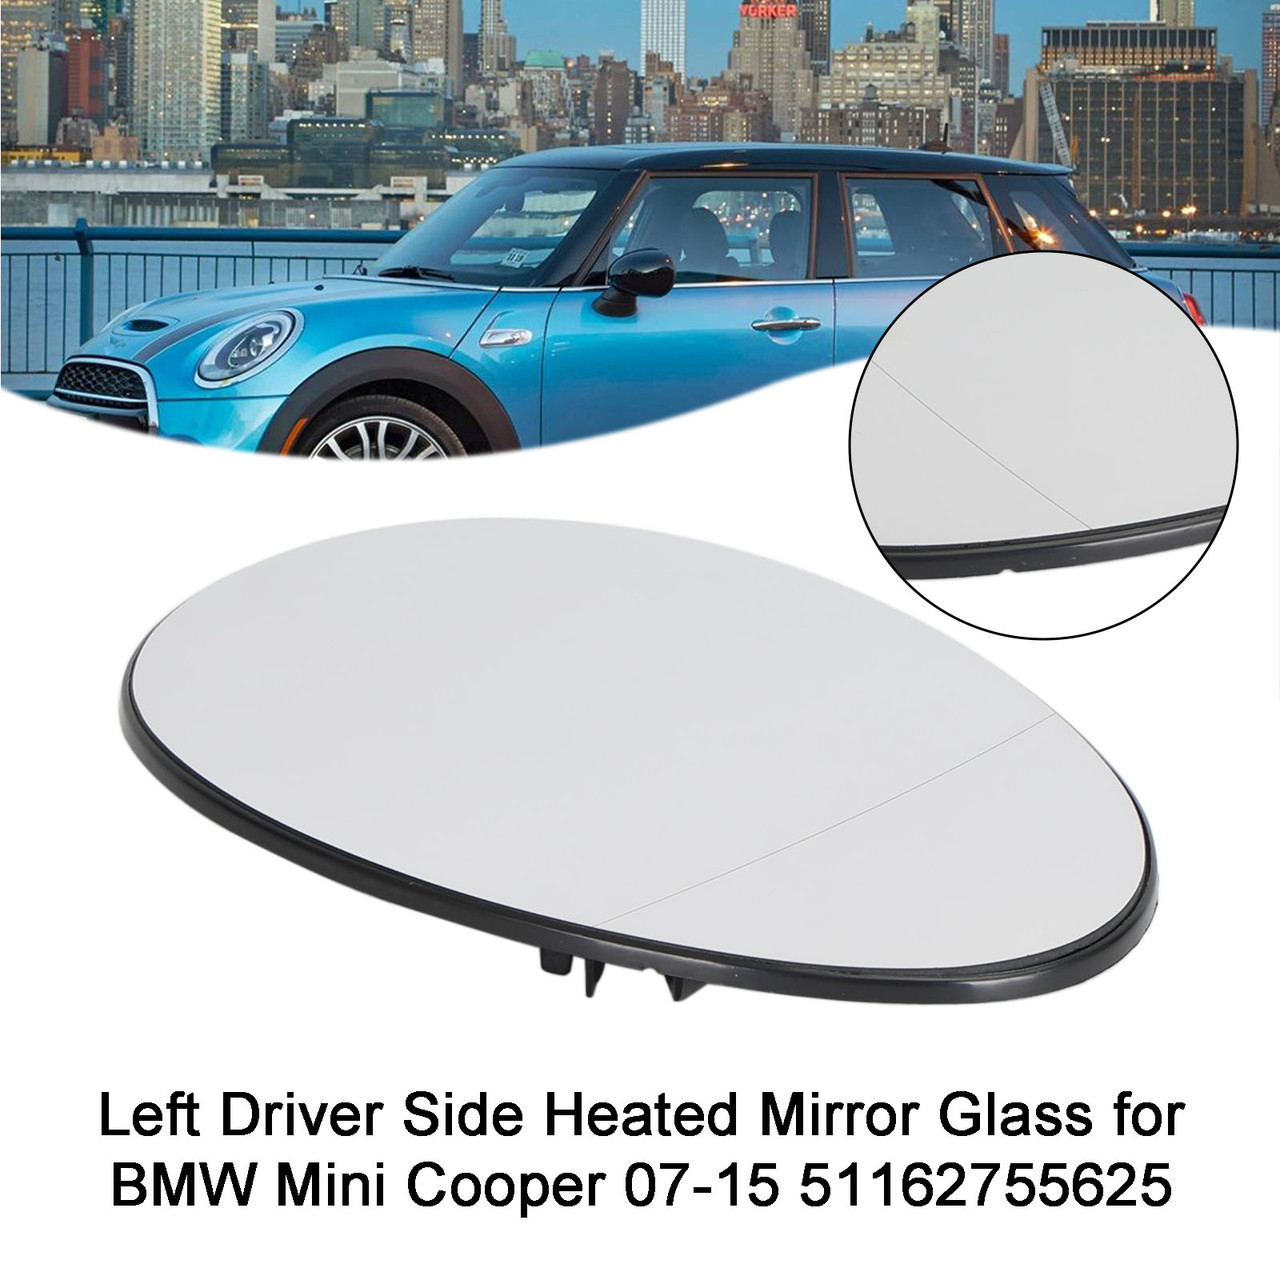 left Driver Side Heated Mirror Glass for BMW Mini Cooper 07-15 51162755625